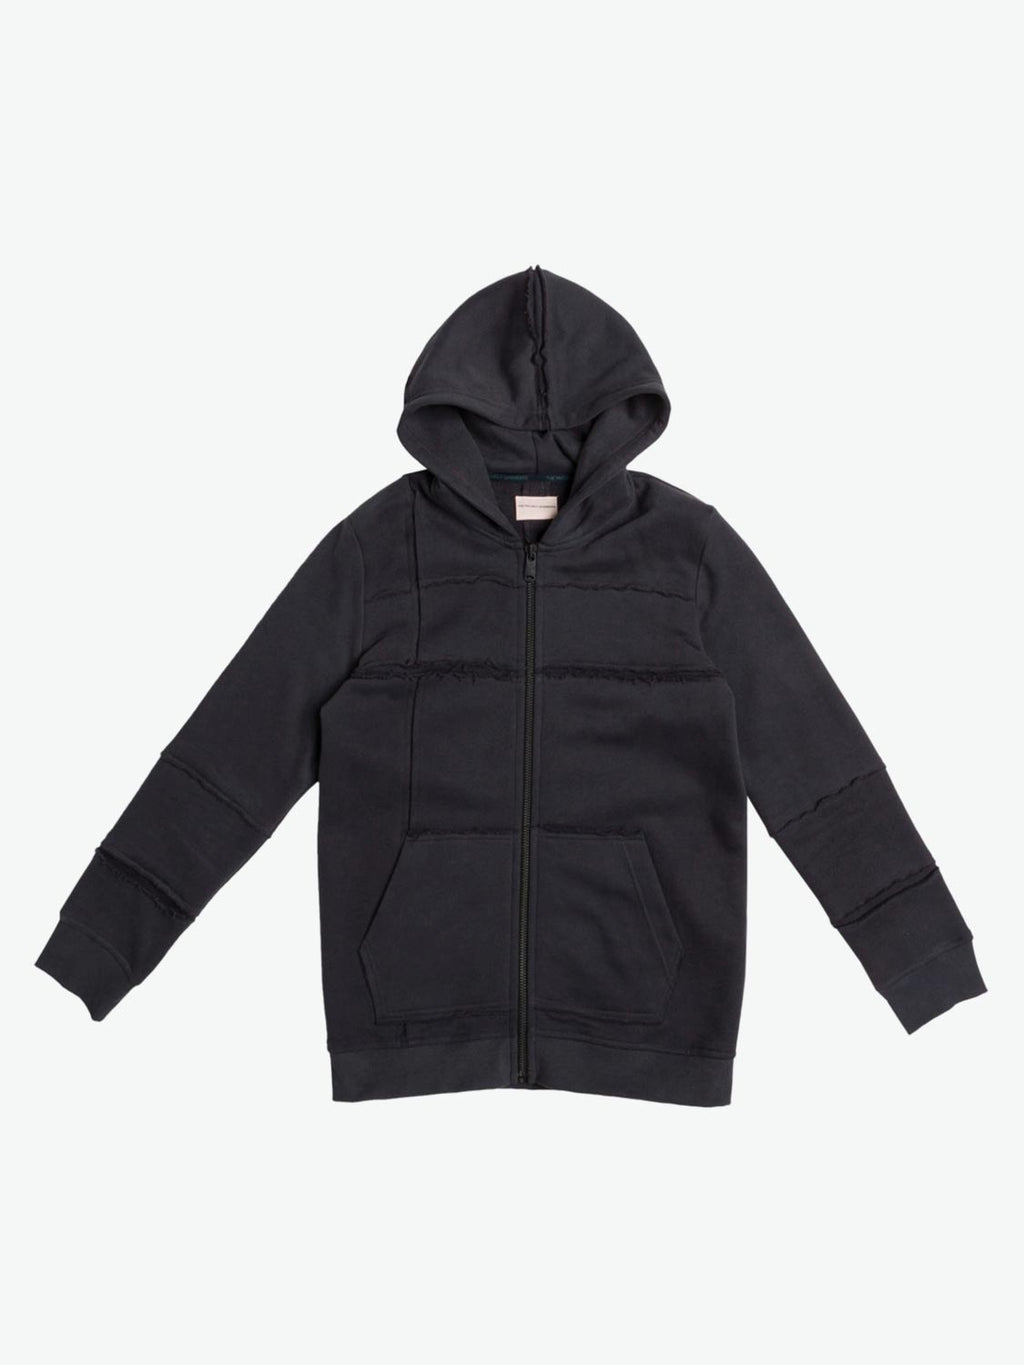 Organic Cotton Laser Cut Zip Up Hoodie Charcoal Grey | The Project Garments - Α